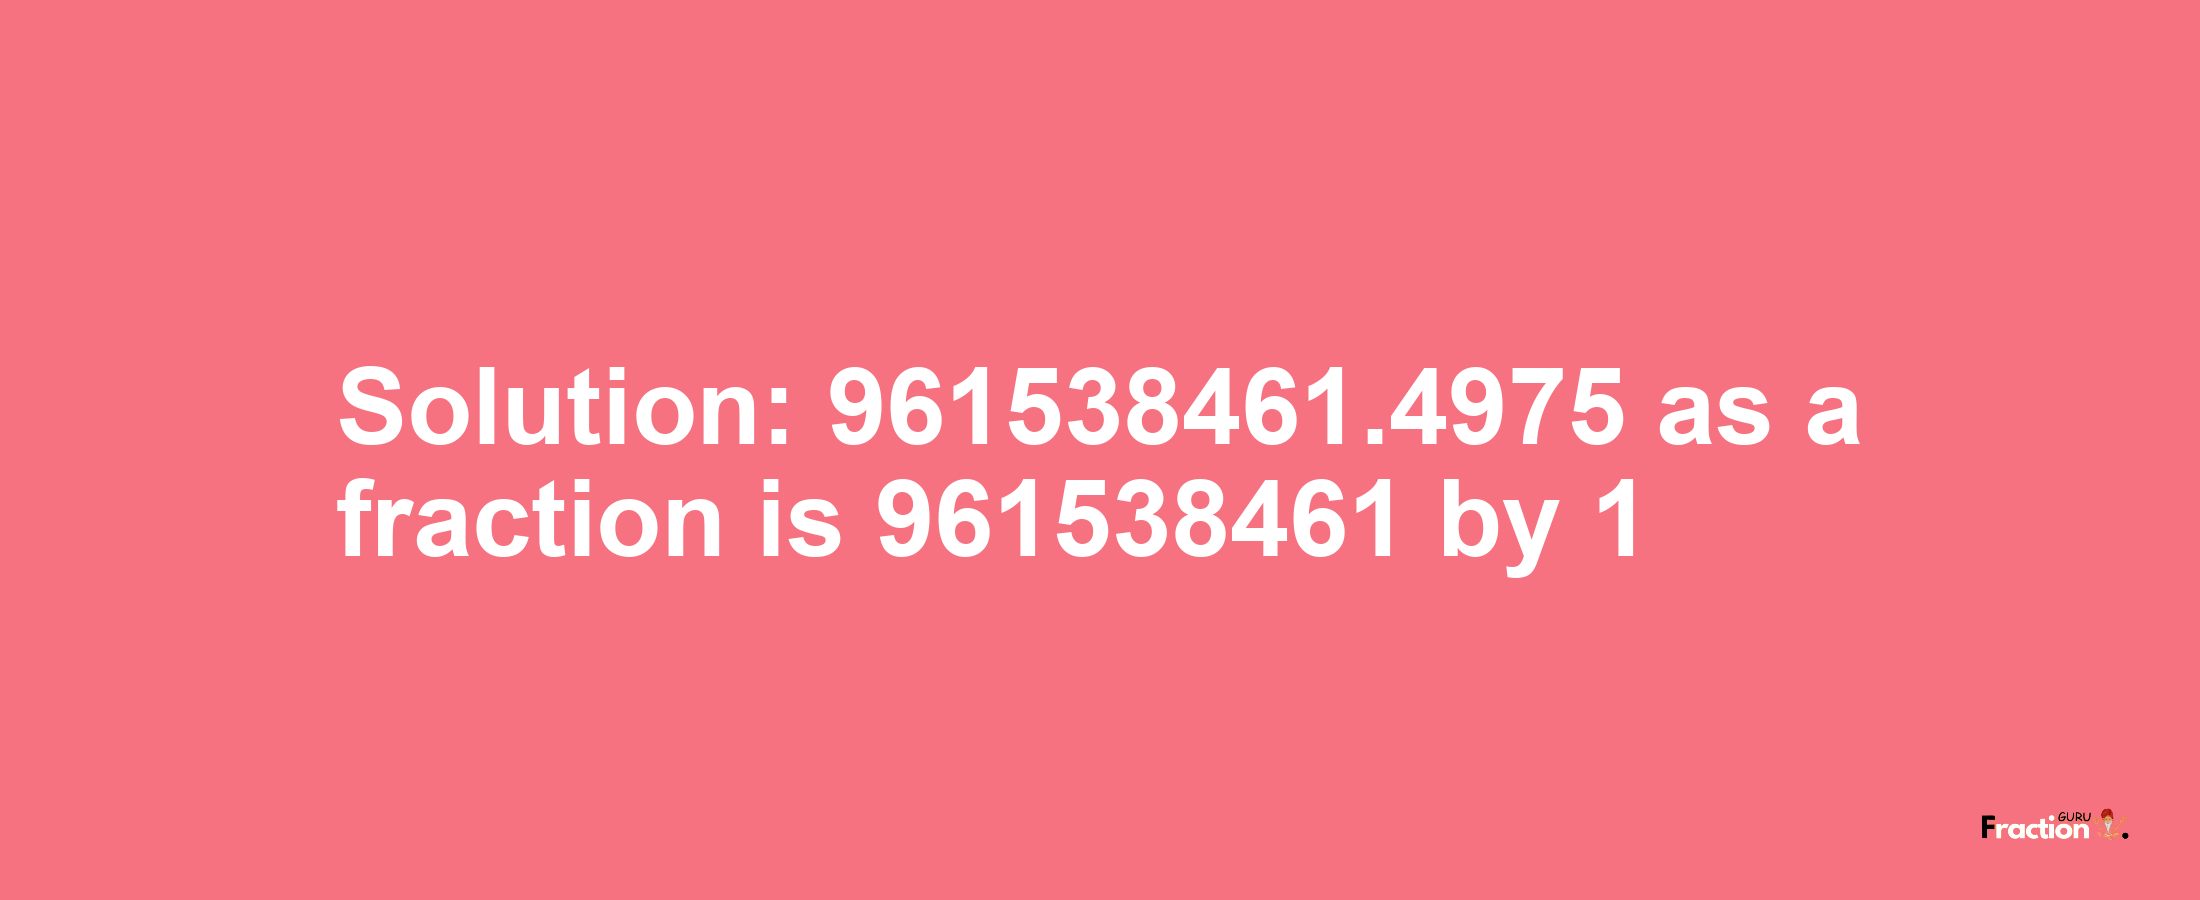 Solution:961538461.4975 as a fraction is 961538461/1